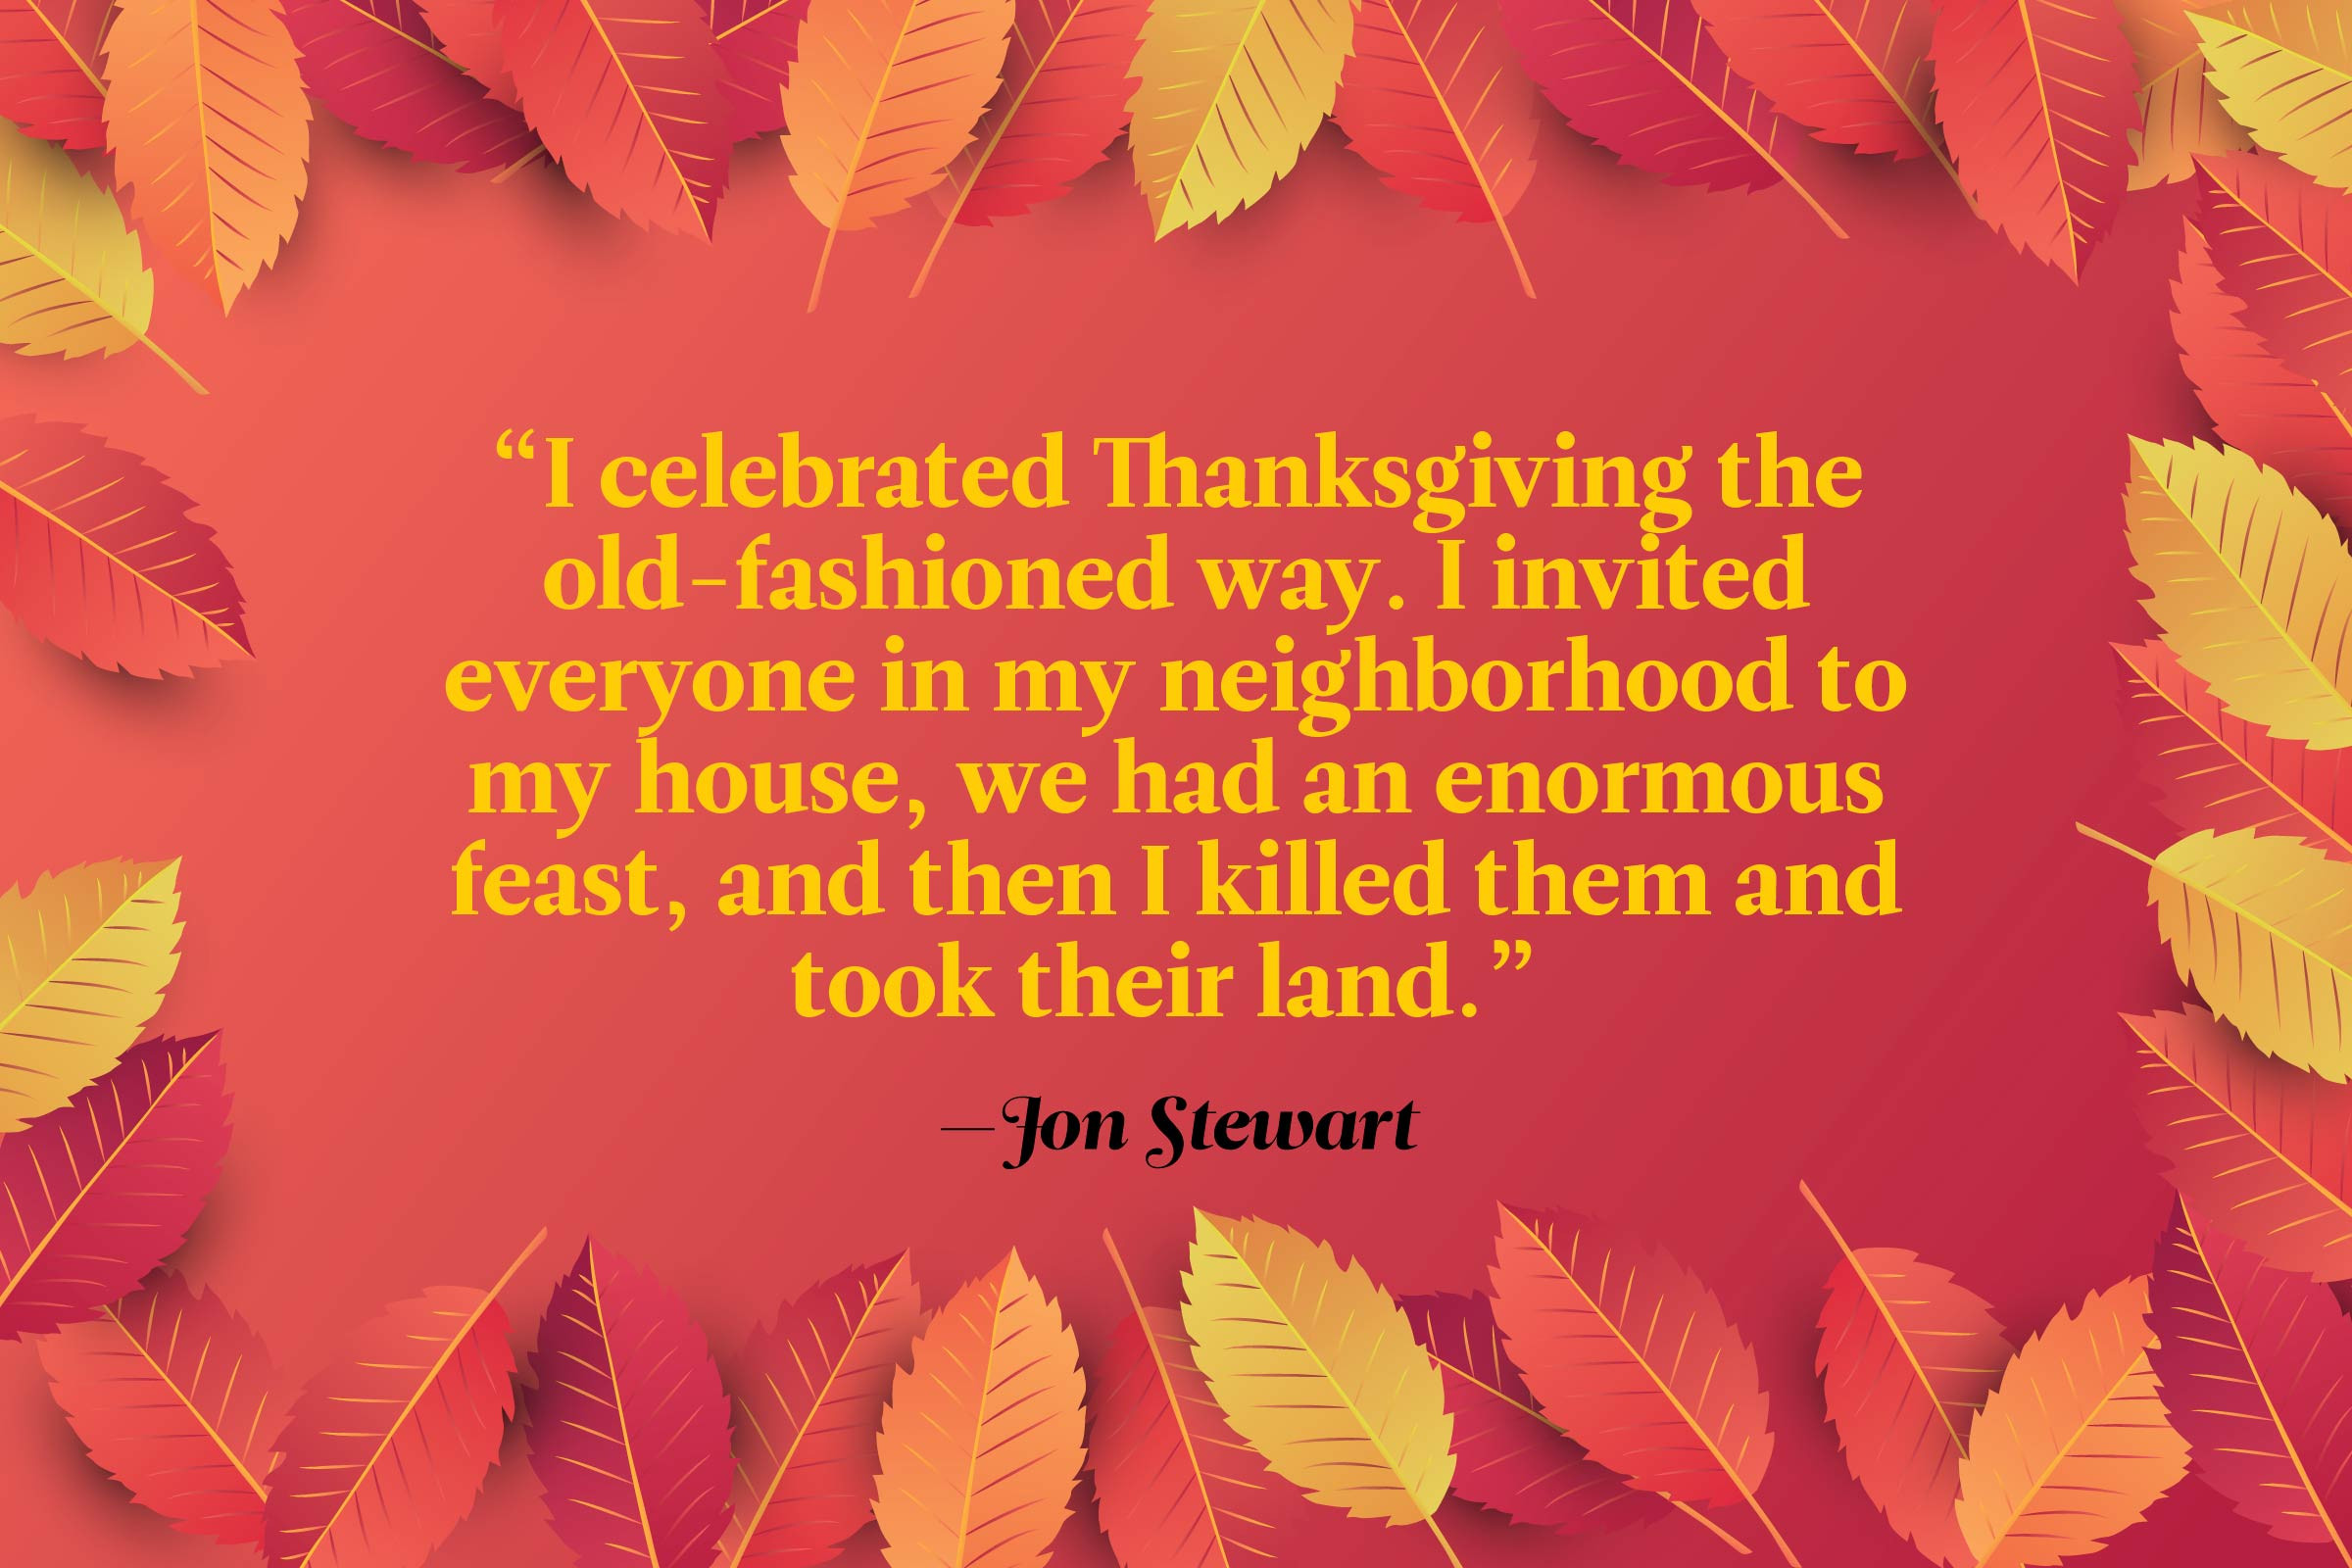 Short Funny Thanksgiving Quotes
 Funny Thanksgiving Quotes to at the Table